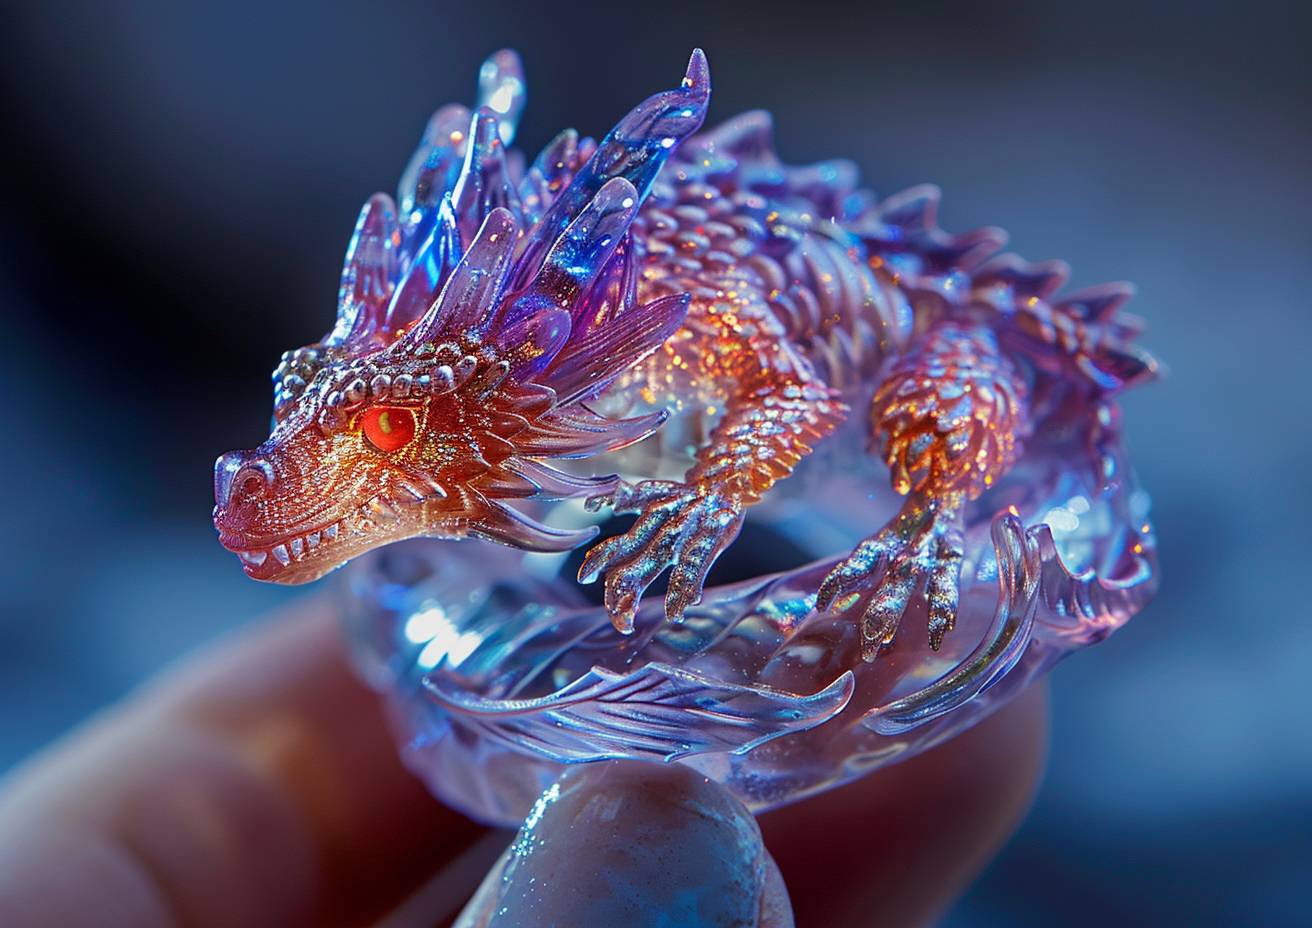 Close-up, a miniature crystal dragon, mounted on a woman's ring, in the style of isomalt crystals, tenebrism, and glowing radiant colors.